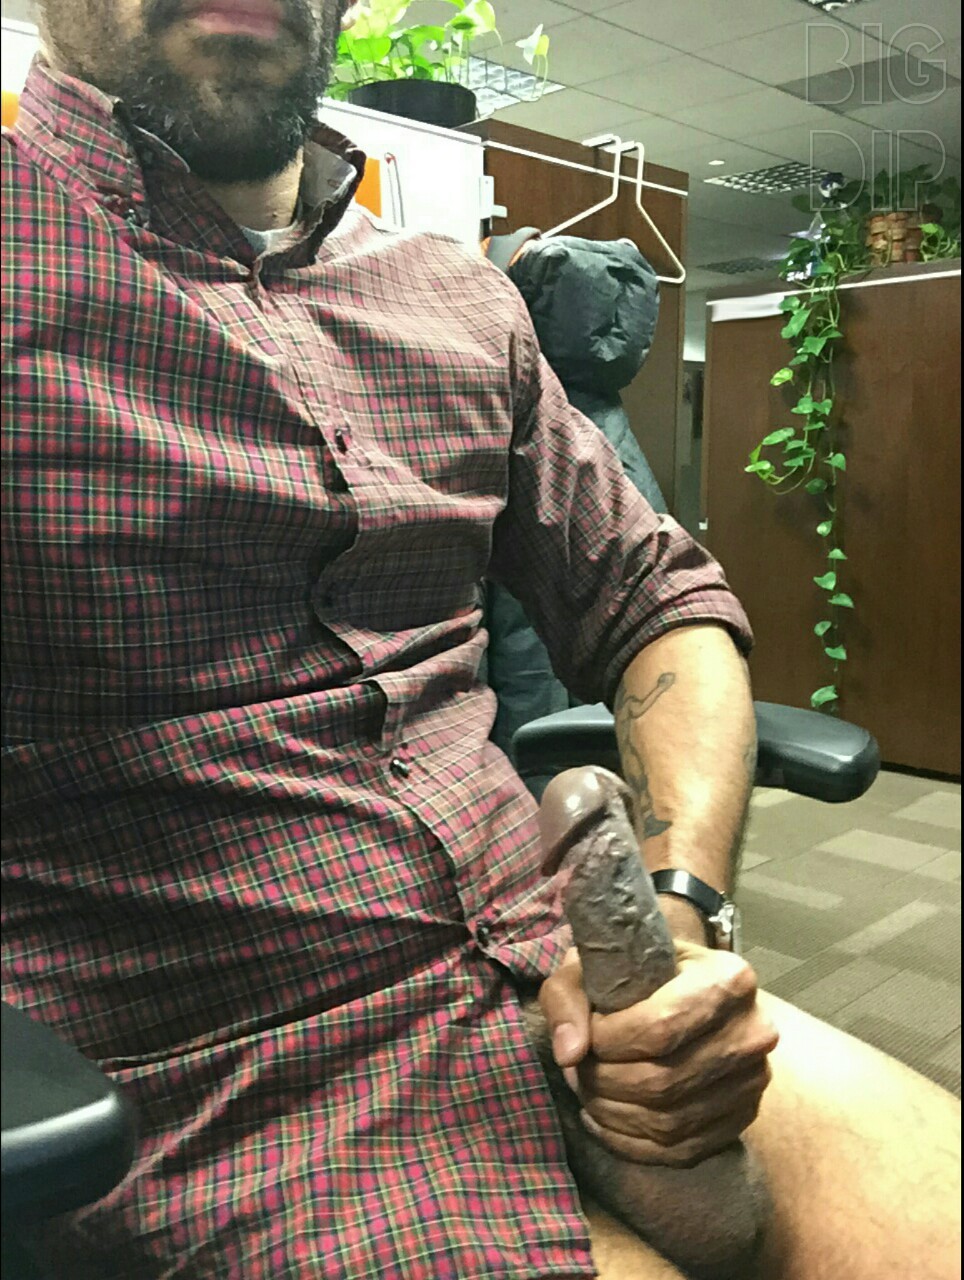 bigdicksinpublic:
“ “I love to masturbate but I don’t do it in public nearly enough. Here’s the first step towards changing that…” - [x]
YOU SIR, ARE HOT AS FUCK!!! We’re here in full support man! 😉! ”
pants down at the office